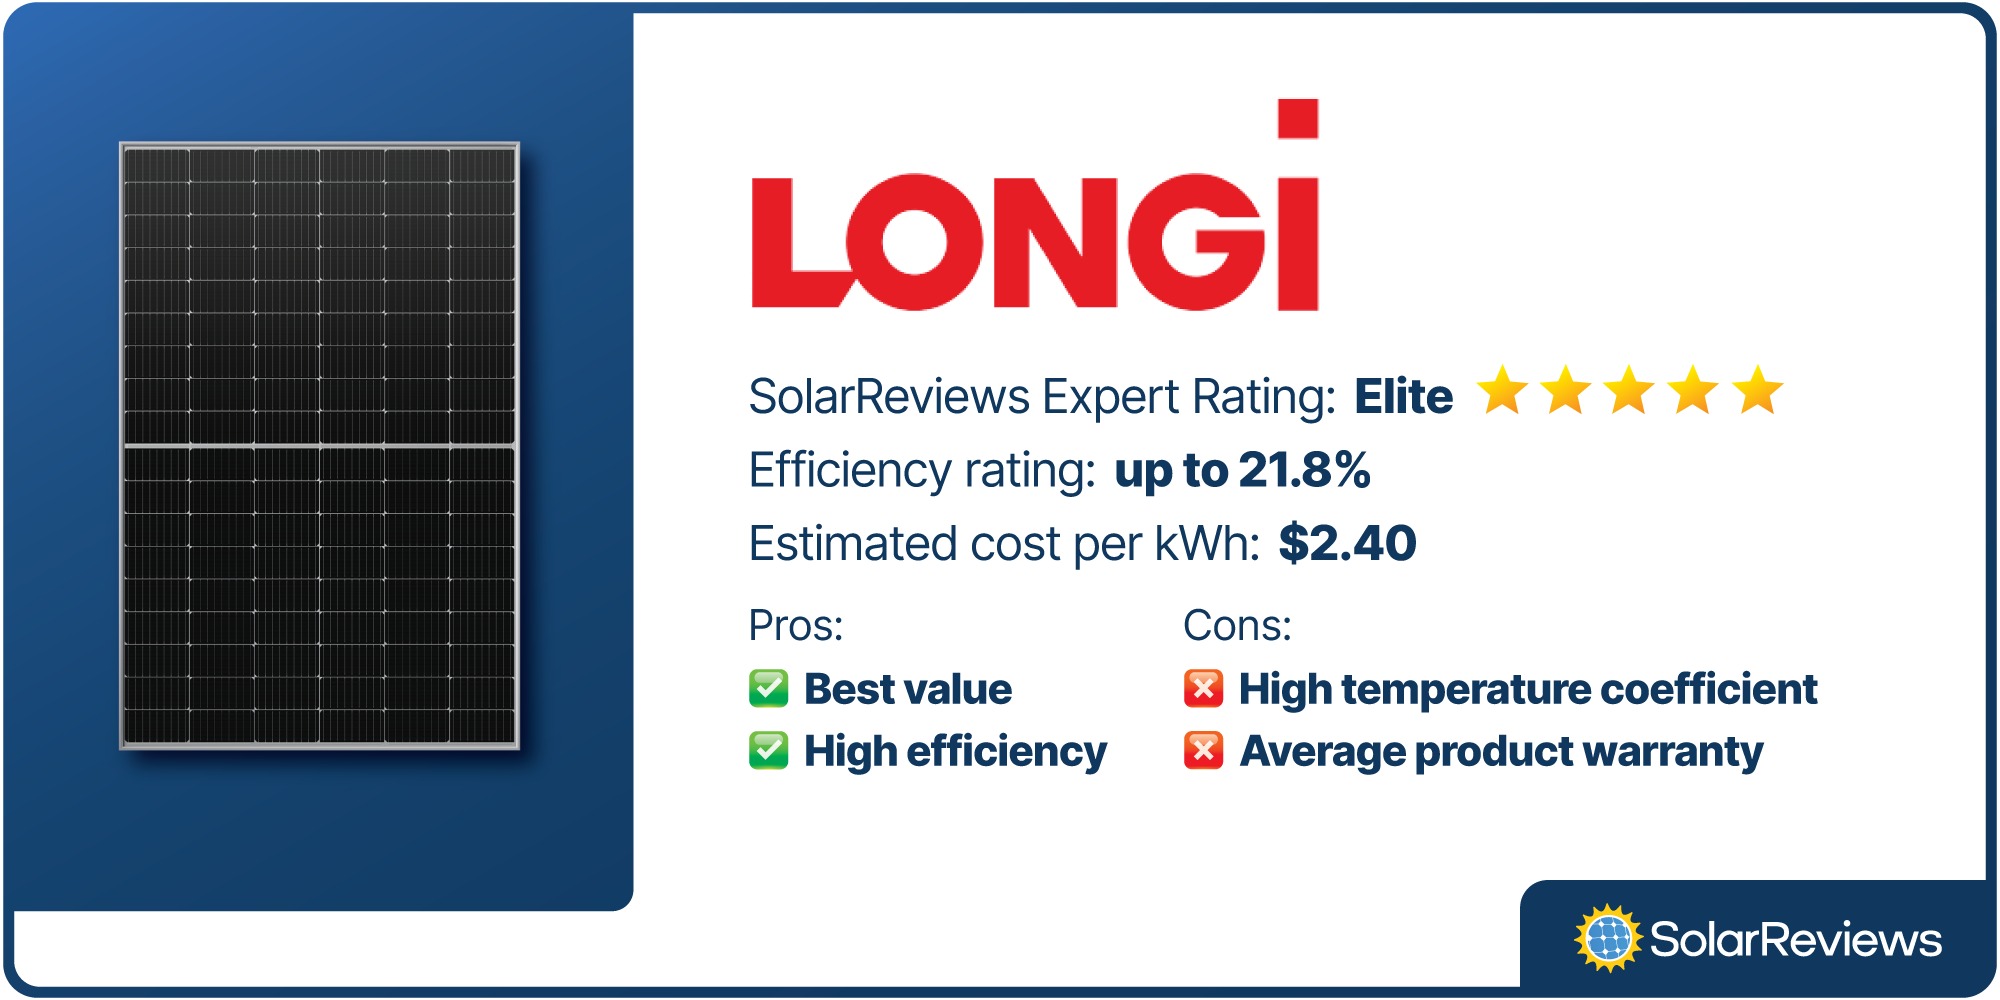 LONGi was voted first overall for best cheap solar panel. With an elite rating from SolarReviews' experts, this LONGi panel has efficiency ratings up to 21.8% and has an estimated cost of $2.40 per kWh.